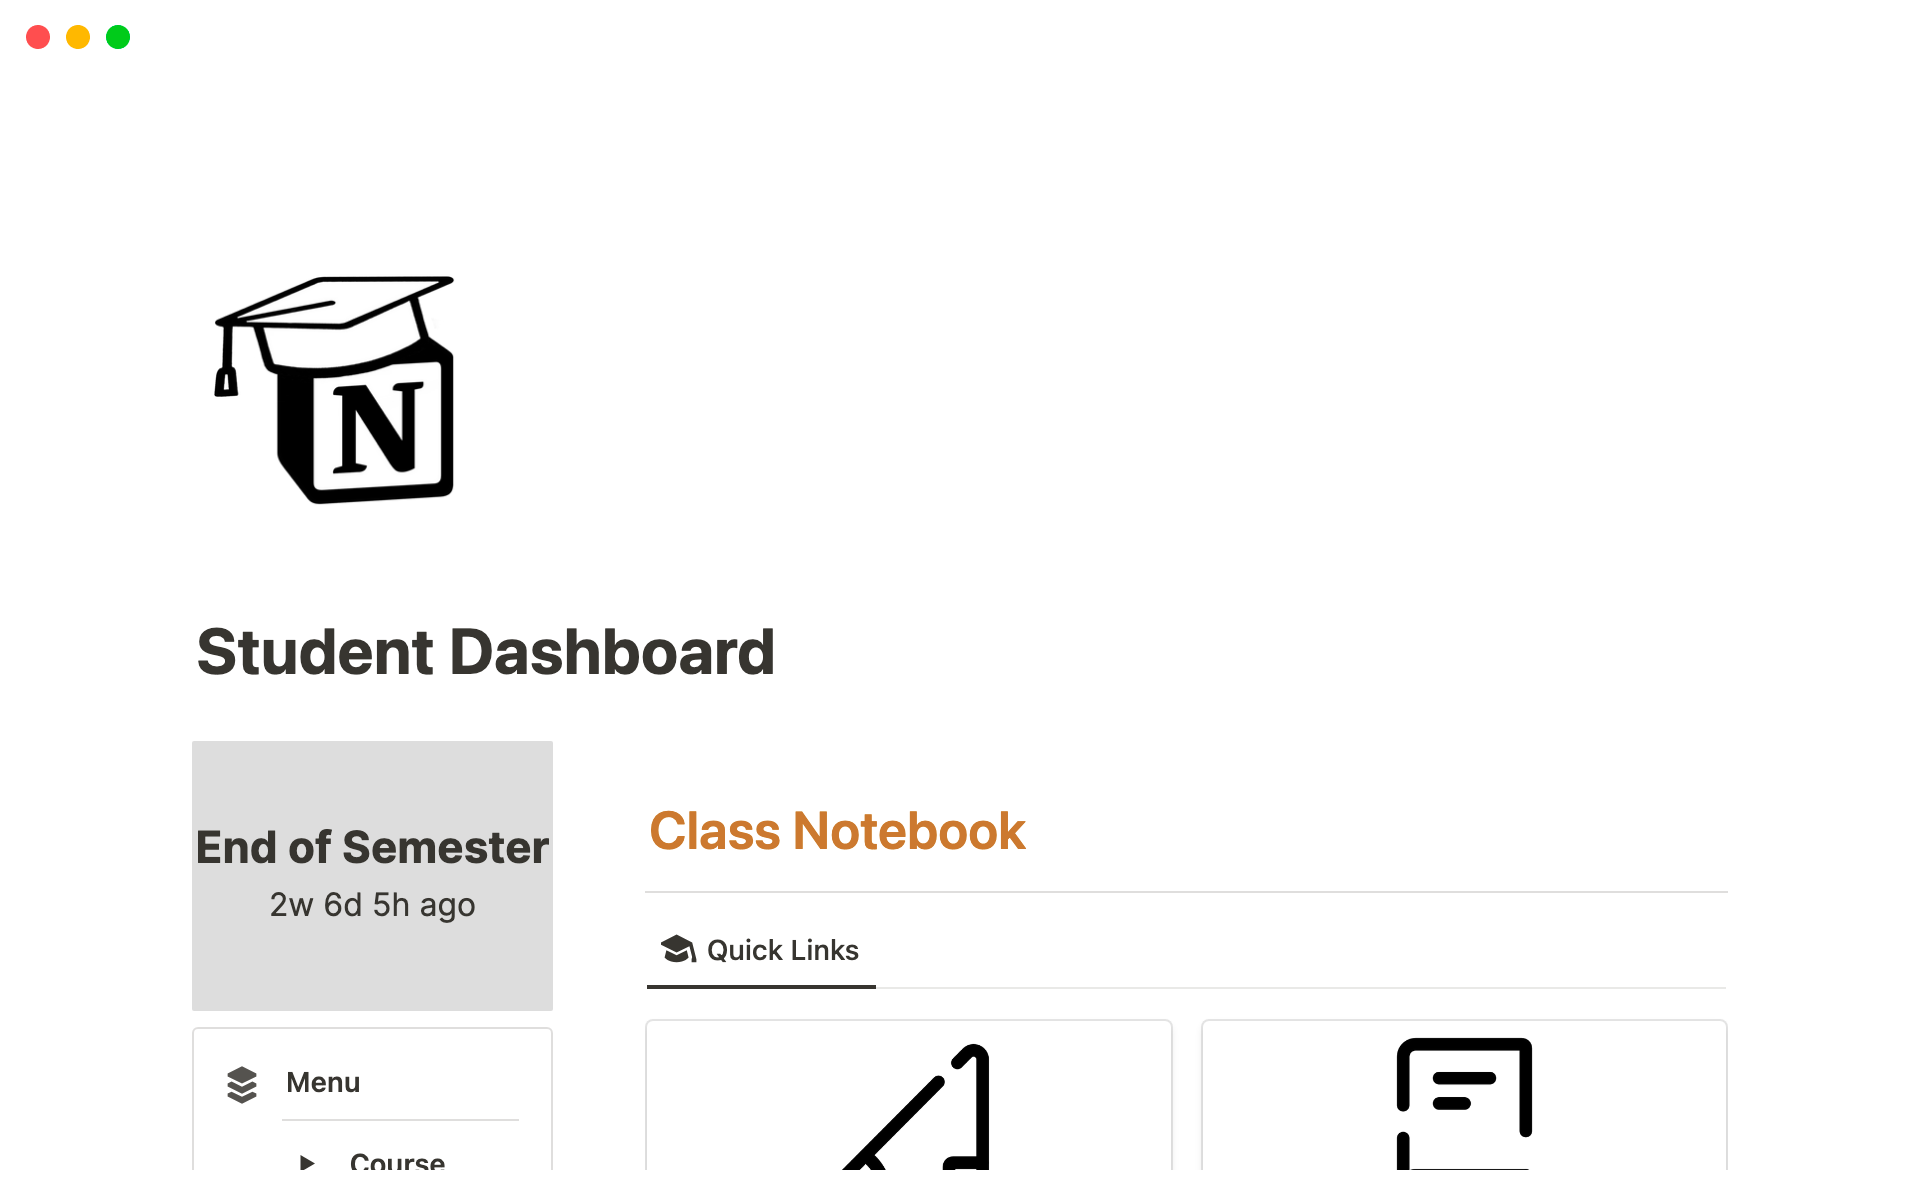 The Student Dashboard by Organisedlyのテンプレートのプレビュー